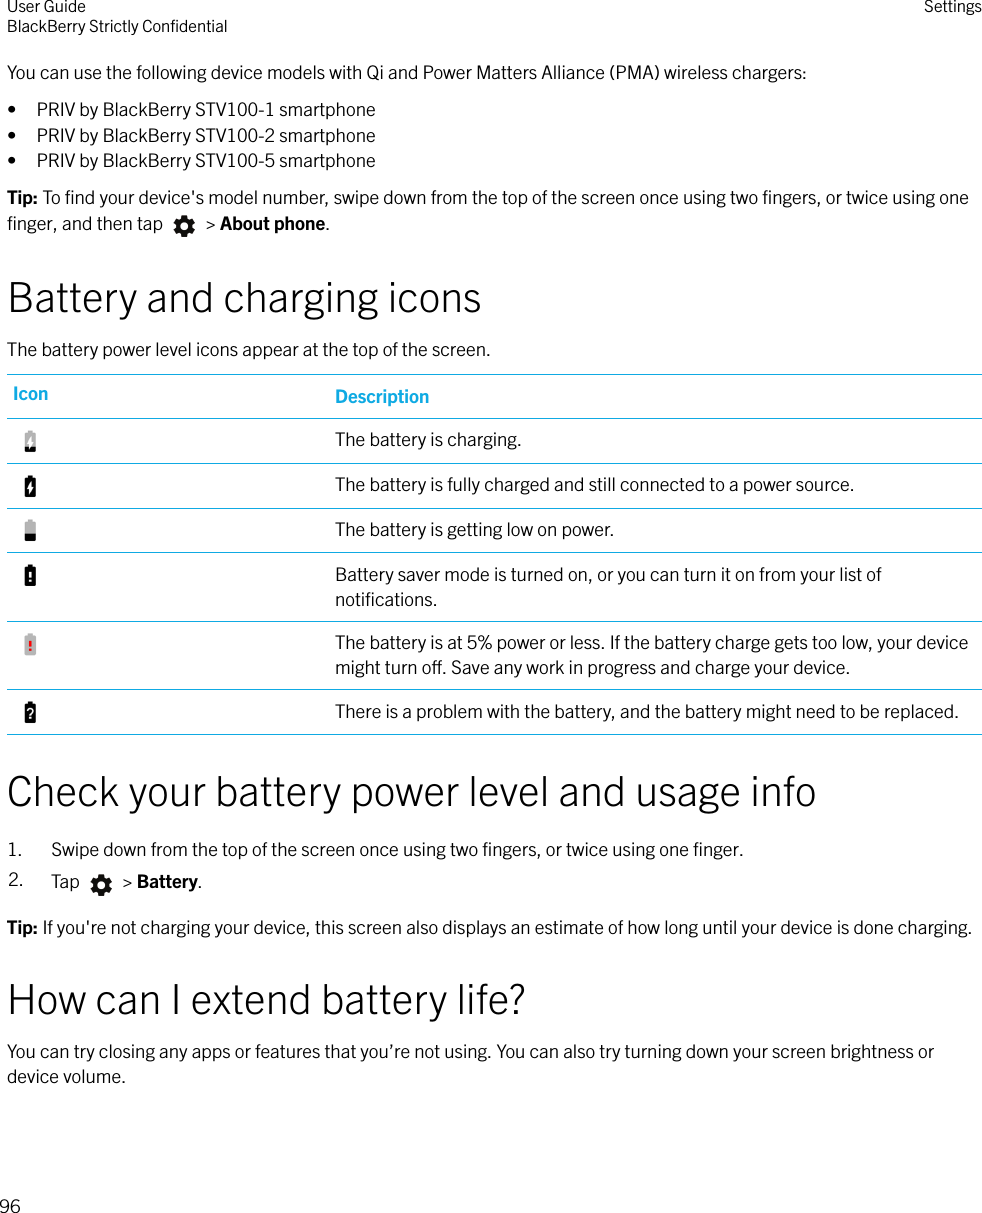 You can use the following device models with Qi and Power Matters Alliance (PMA) wireless chargers:• PRIV by BlackBerry STV100-1 smartphone• PRIV by BlackBerry STV100-2 smartphone• PRIV by BlackBerry STV100-5 smartphoneTip: To ﬁnd your device&apos;s model number, swipe down from the top of the screen once using two ﬁngers, or twice using oneﬁnger, and then tap   &gt; About phone.Battery and charging iconsThe battery power level icons appear at the top of the screen.Icon DescriptionThe battery is charging.The battery is fully charged and still connected to a power source.The battery is getting low on power.Battery saver mode is turned on, or you can turn it on from your list ofnotiﬁcations.The battery is at 5% power or less. If the battery charge gets too low, your devicemight turn o. Save any work in progress and charge your device.There is a problem with the battery, and the battery might need to be replaced.Check your battery power level and usage info1. Swipe down from the top of the screen once using two ﬁngers, or twice using one ﬁnger.2. Tap   &gt; Battery.Tip: If you&apos;re not charging your device, this screen also displays an estimate of how long until your device is done charging.How can I extend battery life?You can try closing any apps or features that you’re not using. You can also try turning down your screen brightness ordevice volume.User GuideBlackBerry Strictly ConﬁdentialSettings96